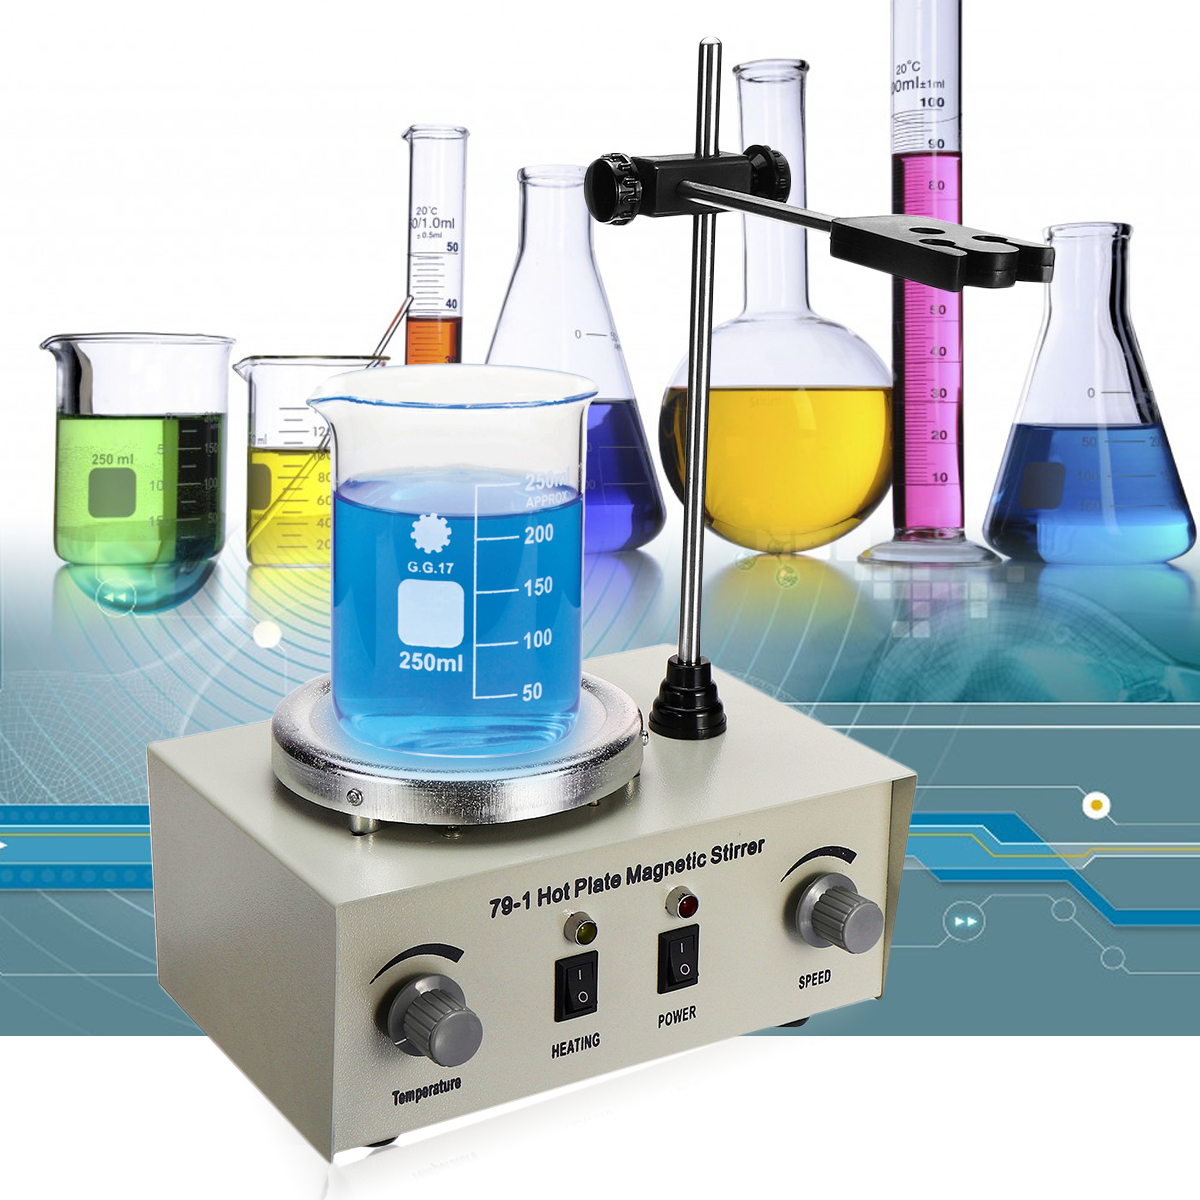 79-1-1000ML-Hot-Plate-Magnetic-Stirrer-Lab-Heating-Mixer-Temperature-Speed-Adjustable-1298966-1